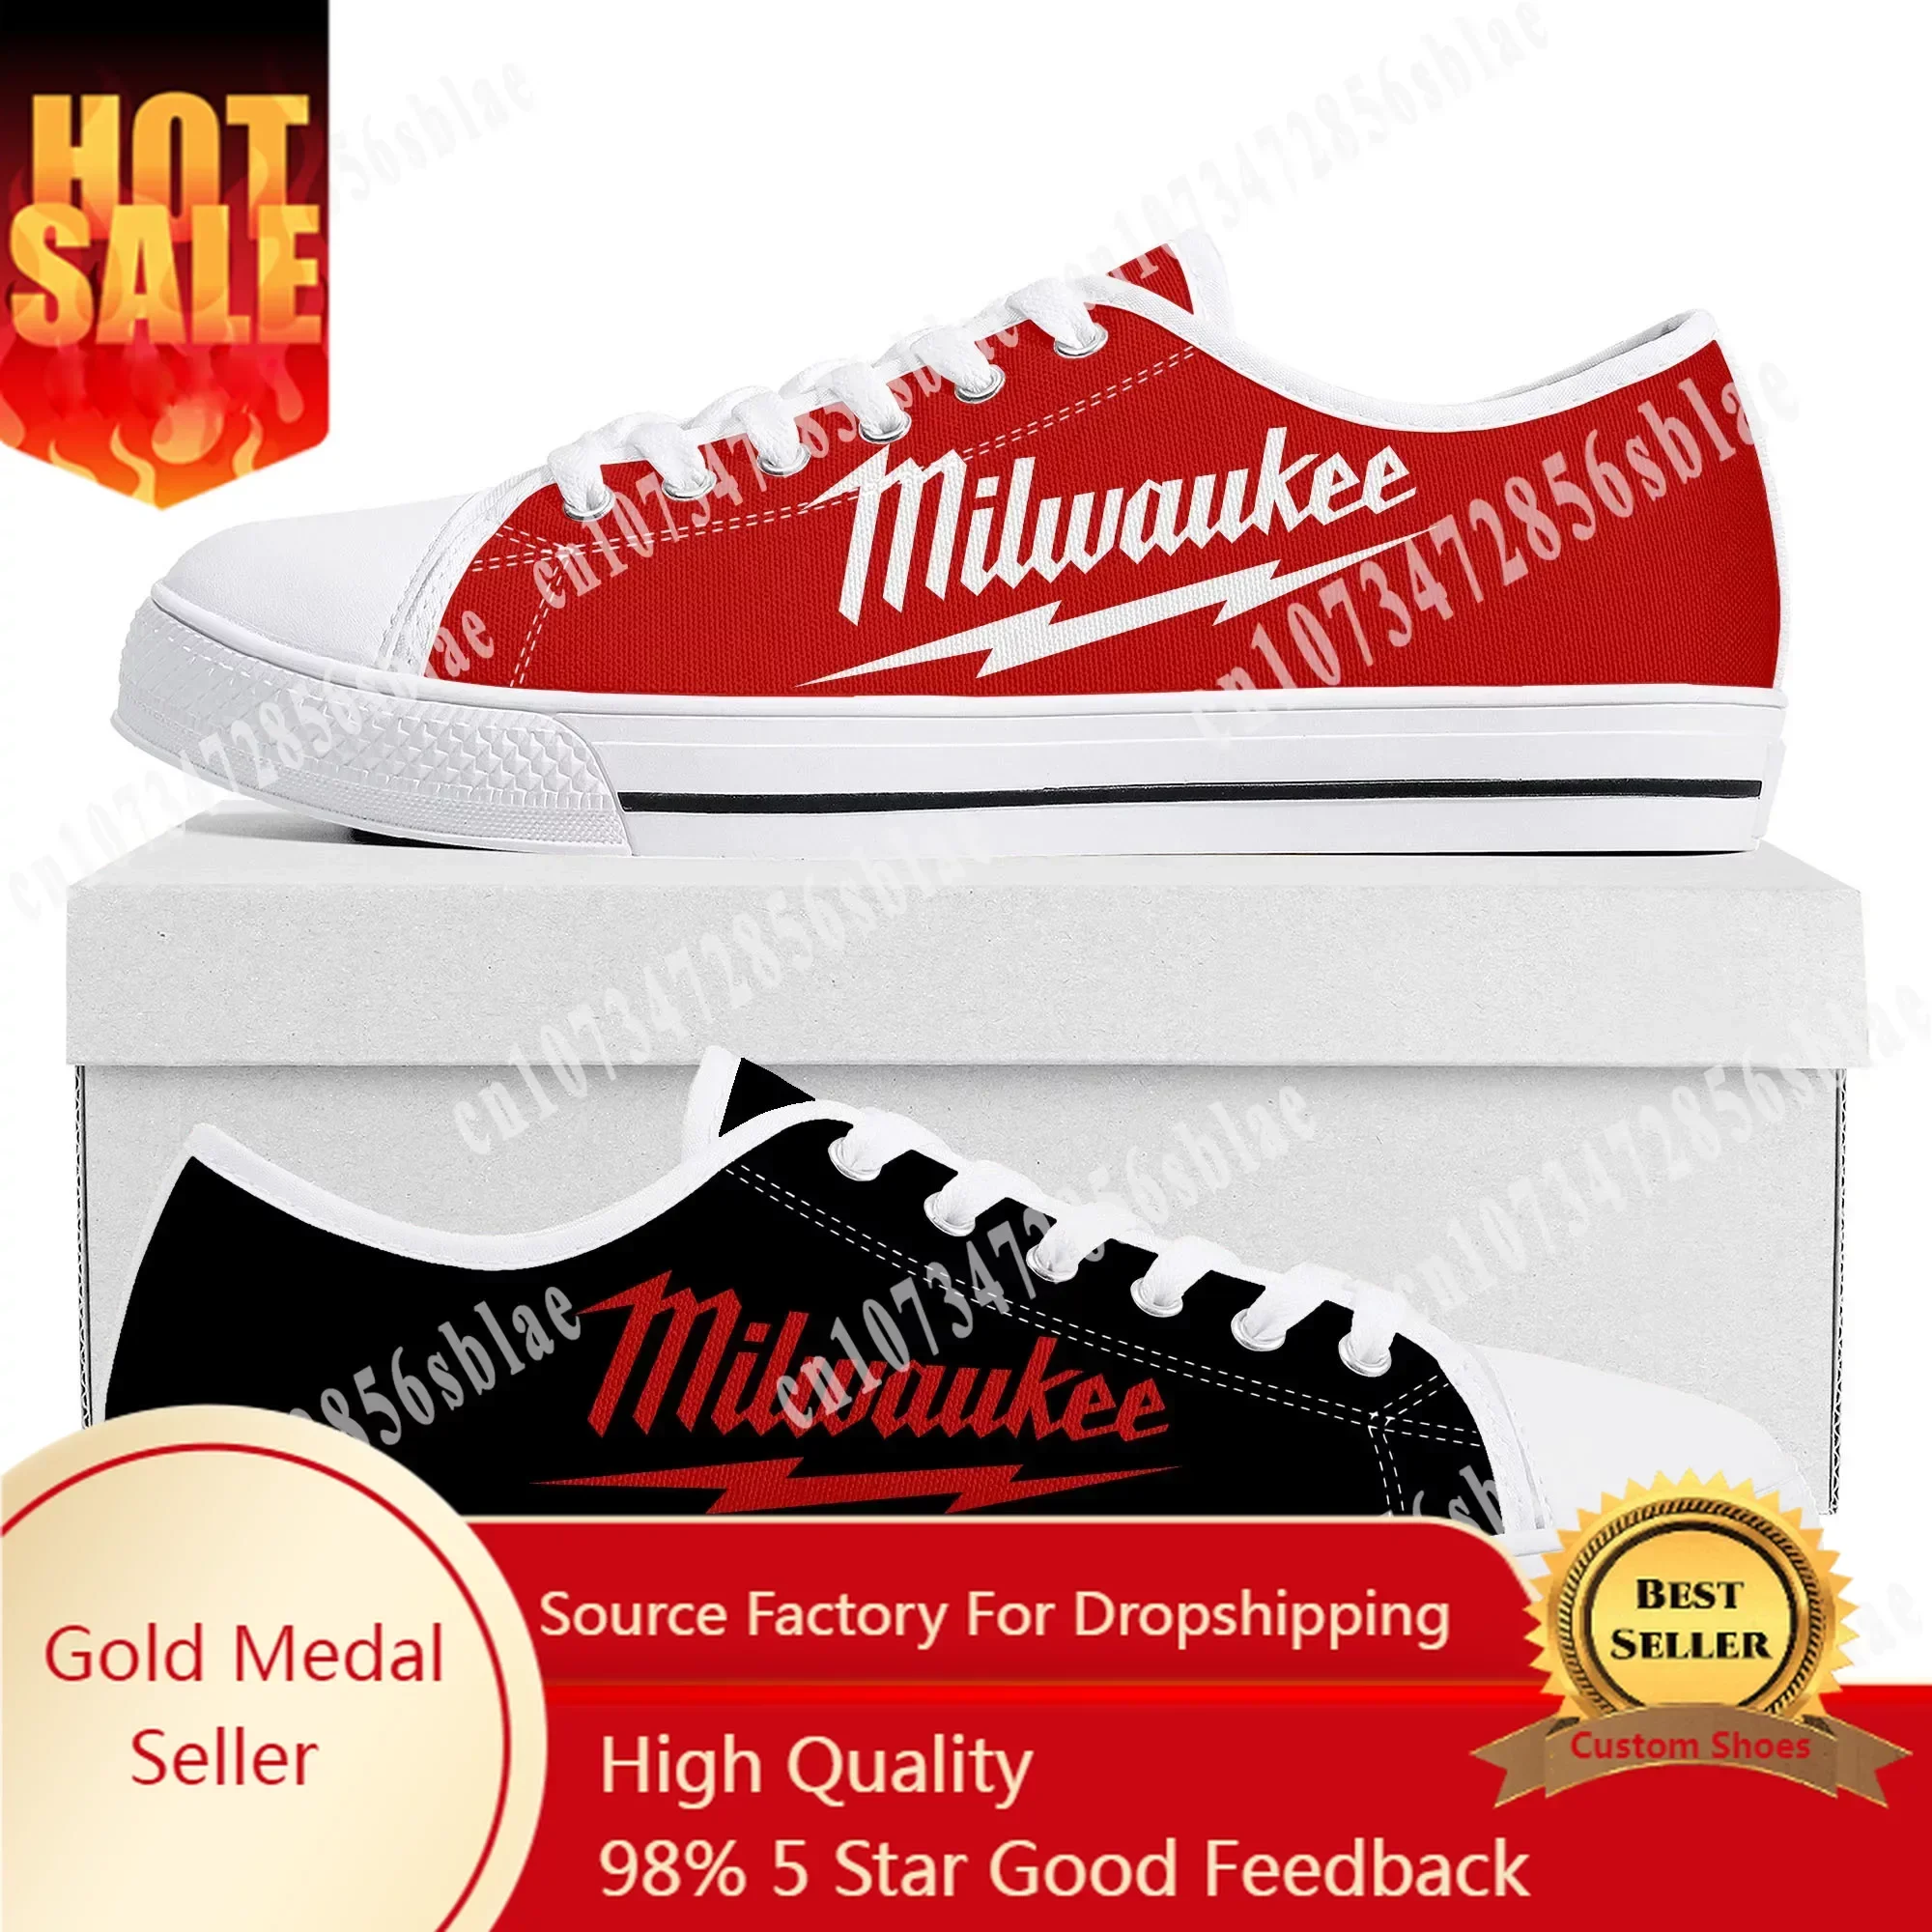 

Nothing but HEAVY DUTY Low Top Sneakers Men Womens Teenager Canvas Fashion Sneaker Casual Custom Made Shoes Customize Shoe White